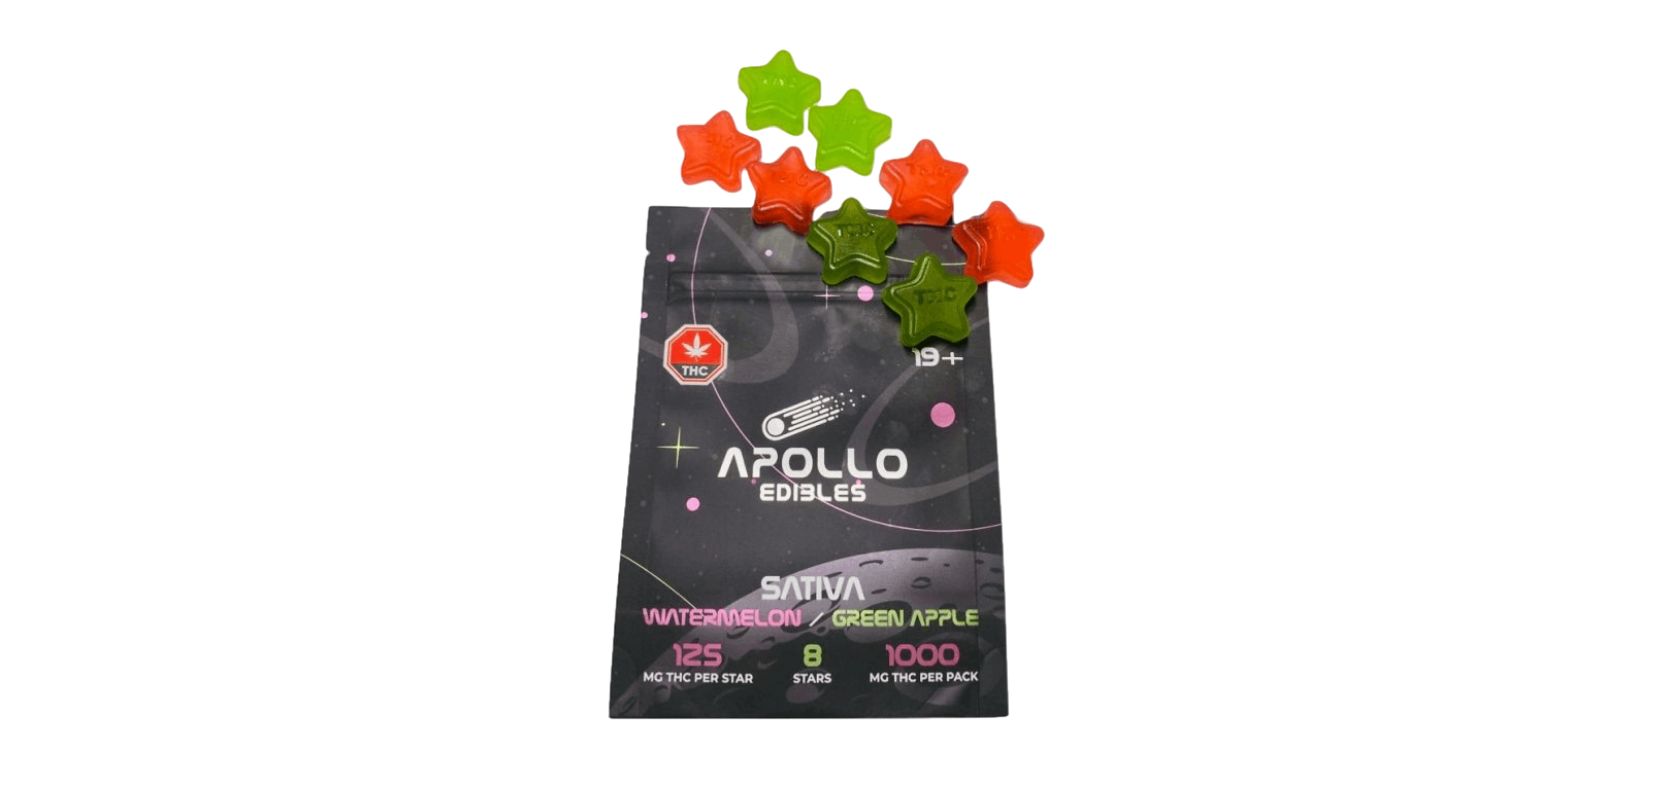 Are you looking to travel to the depths of the galaxy? Have a taste of the Apollo Edibles Watermelon/Green Apple Shooting Stars.